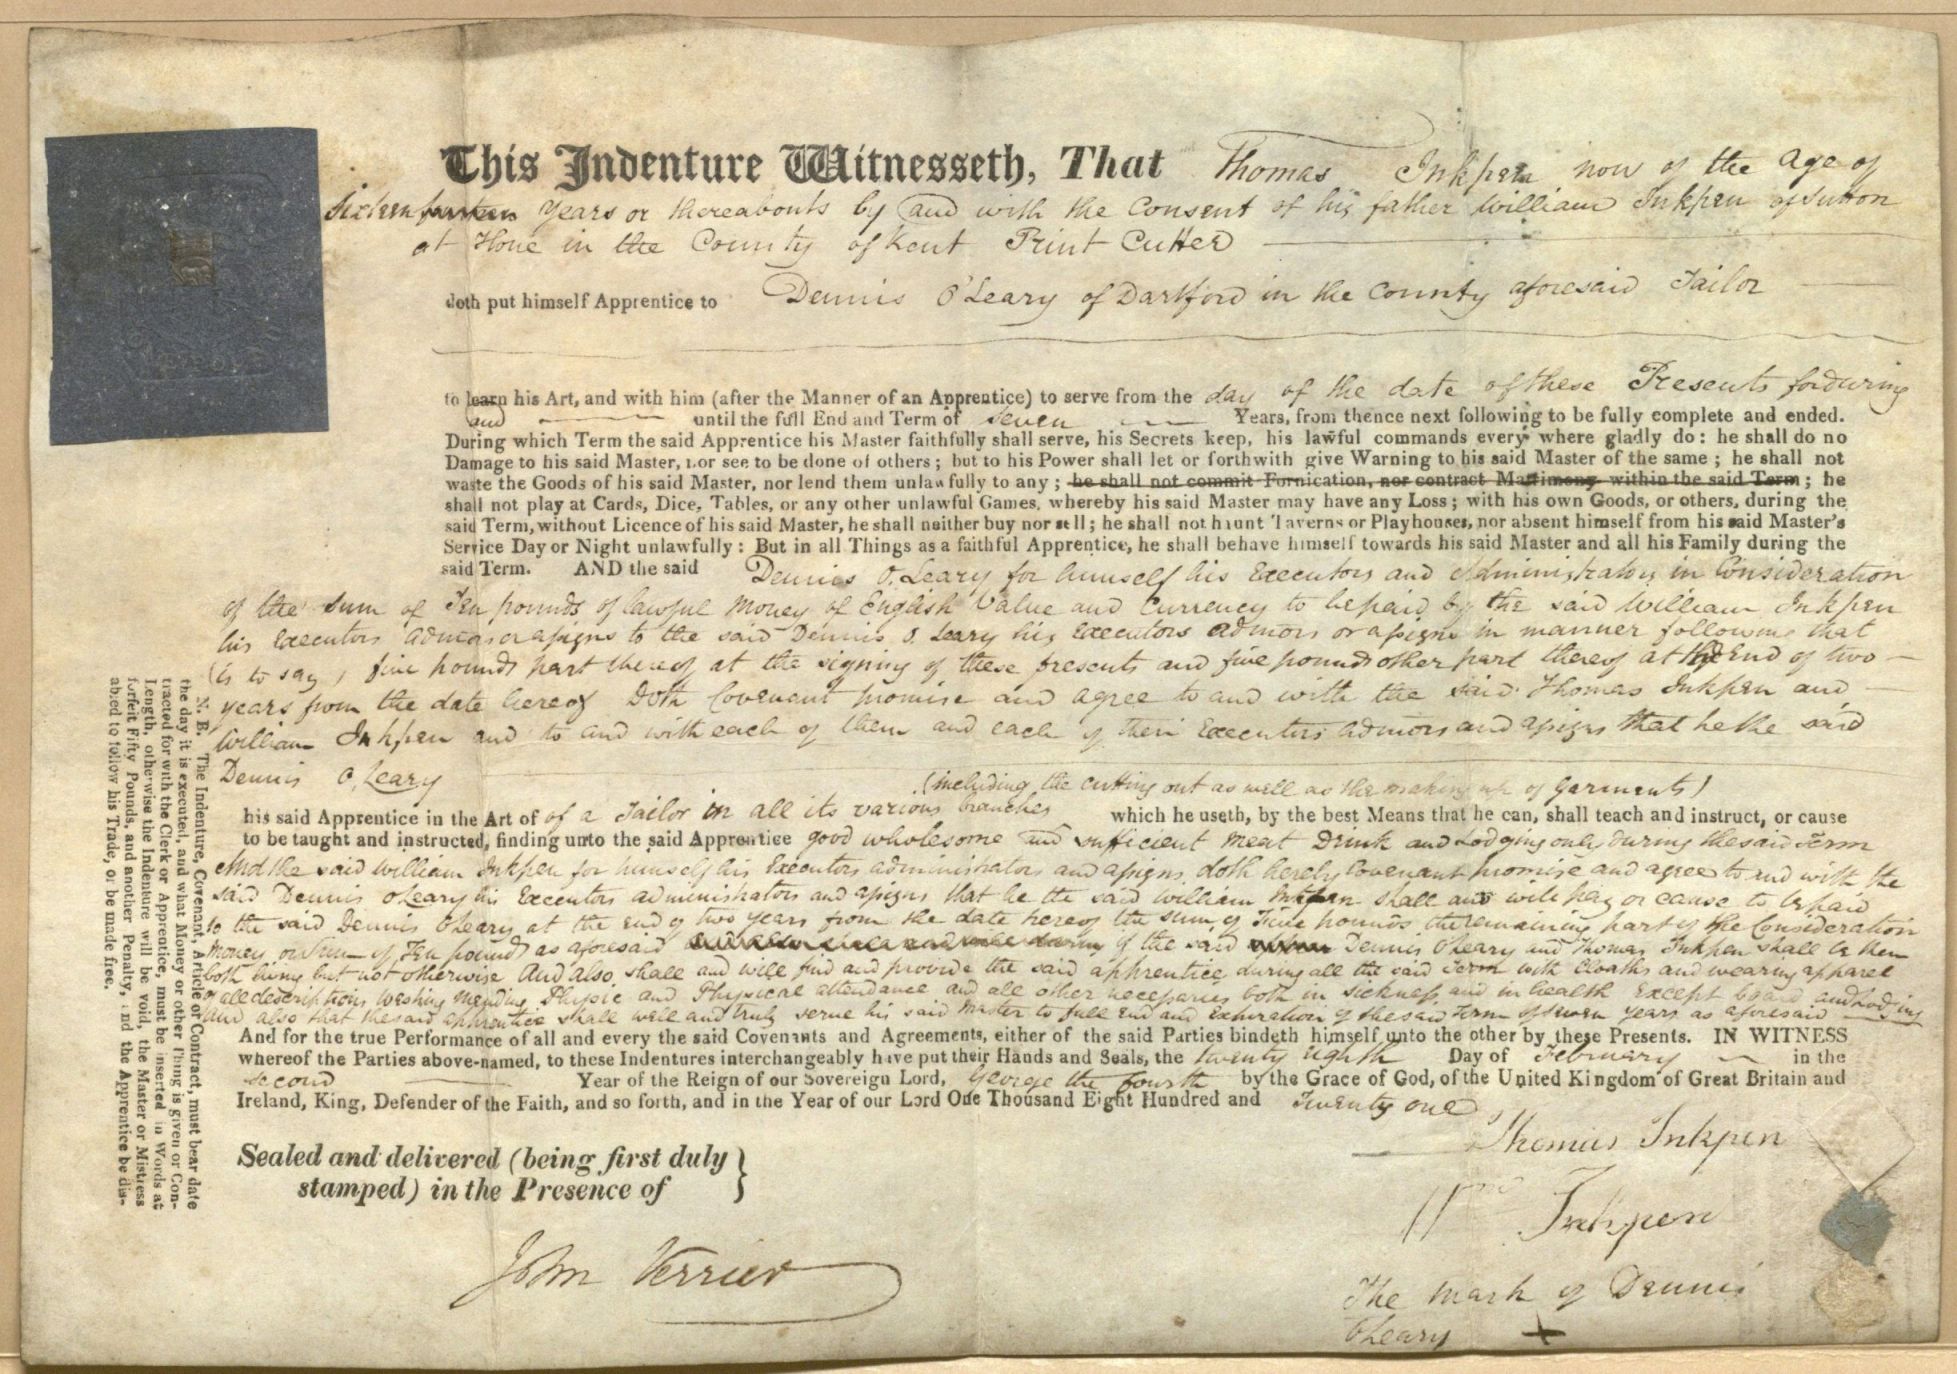 Image of an apprenticeship indenture with fornication/marriage clause struck out, 1821.